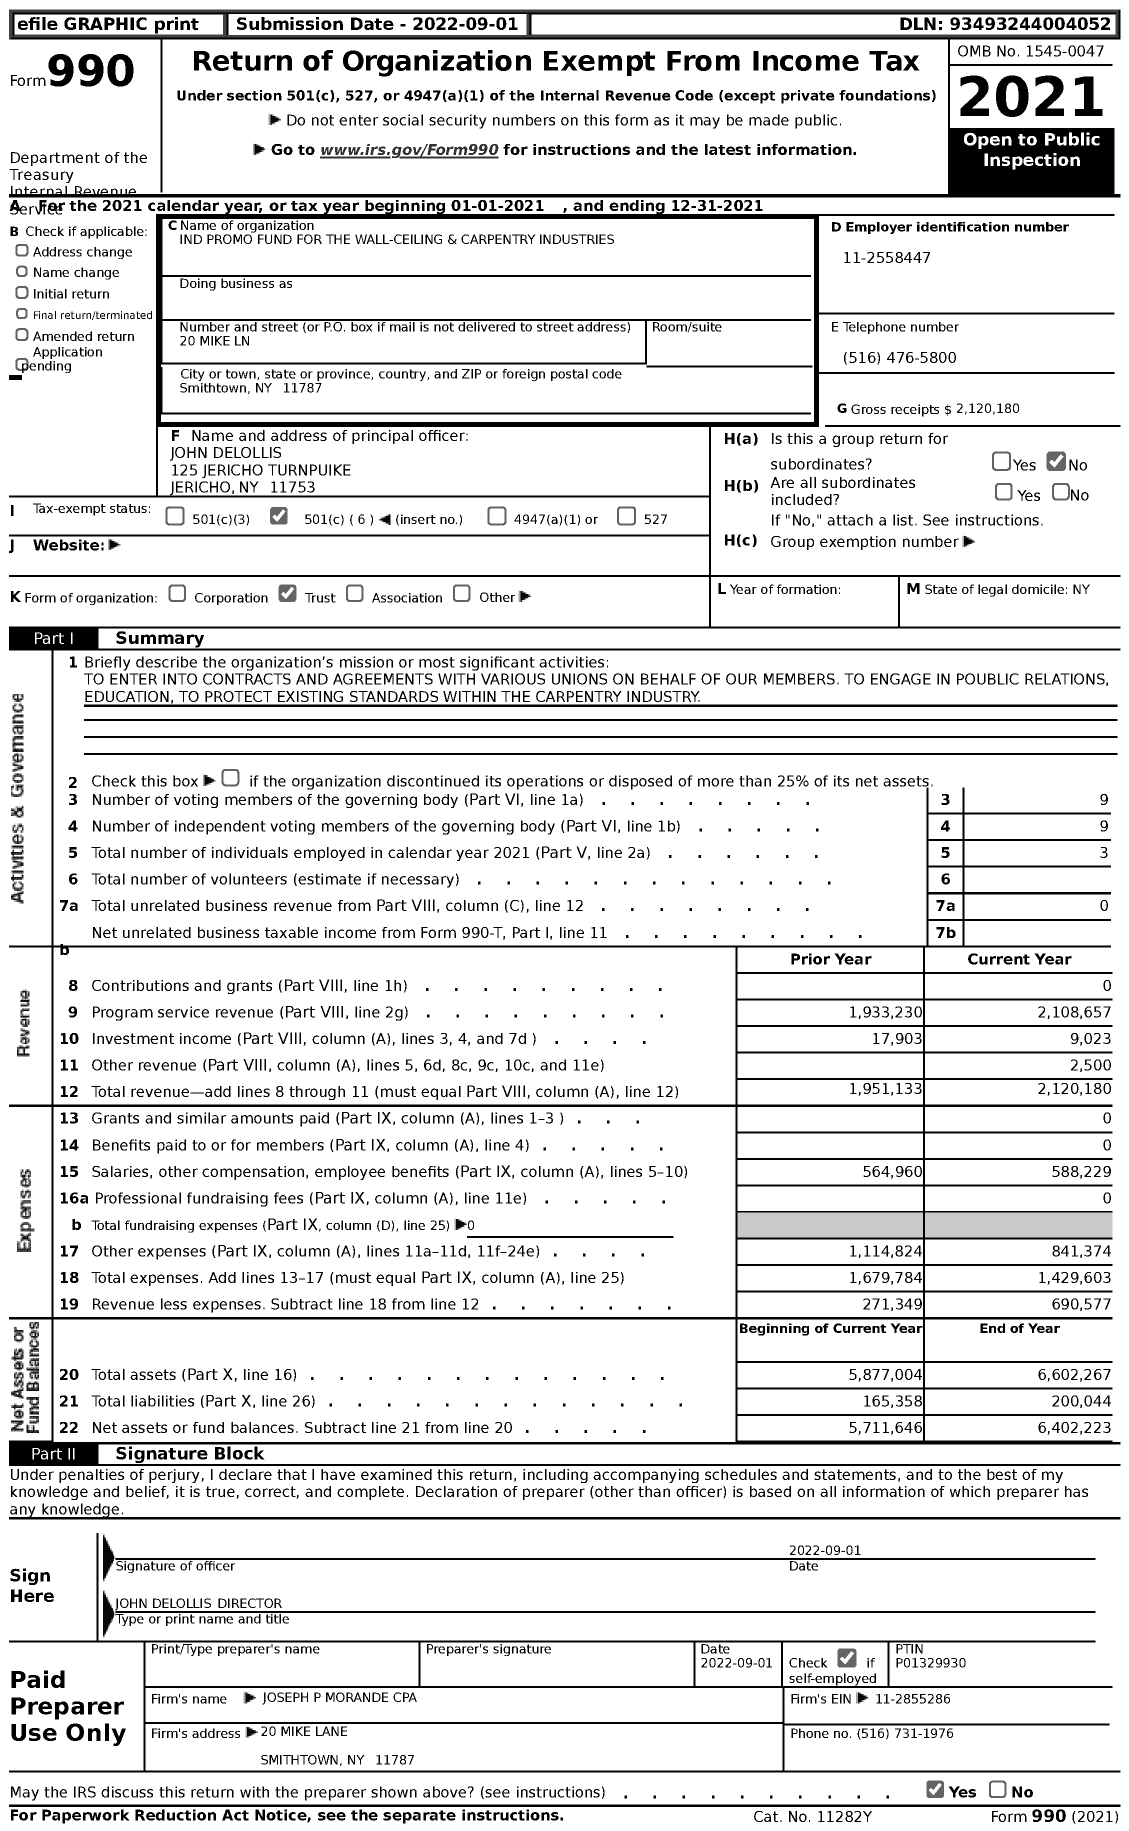 Image of first page of 2021 Form 990 for Industry Promotional Fund for the Wall Ceiling & Carpentry Industry